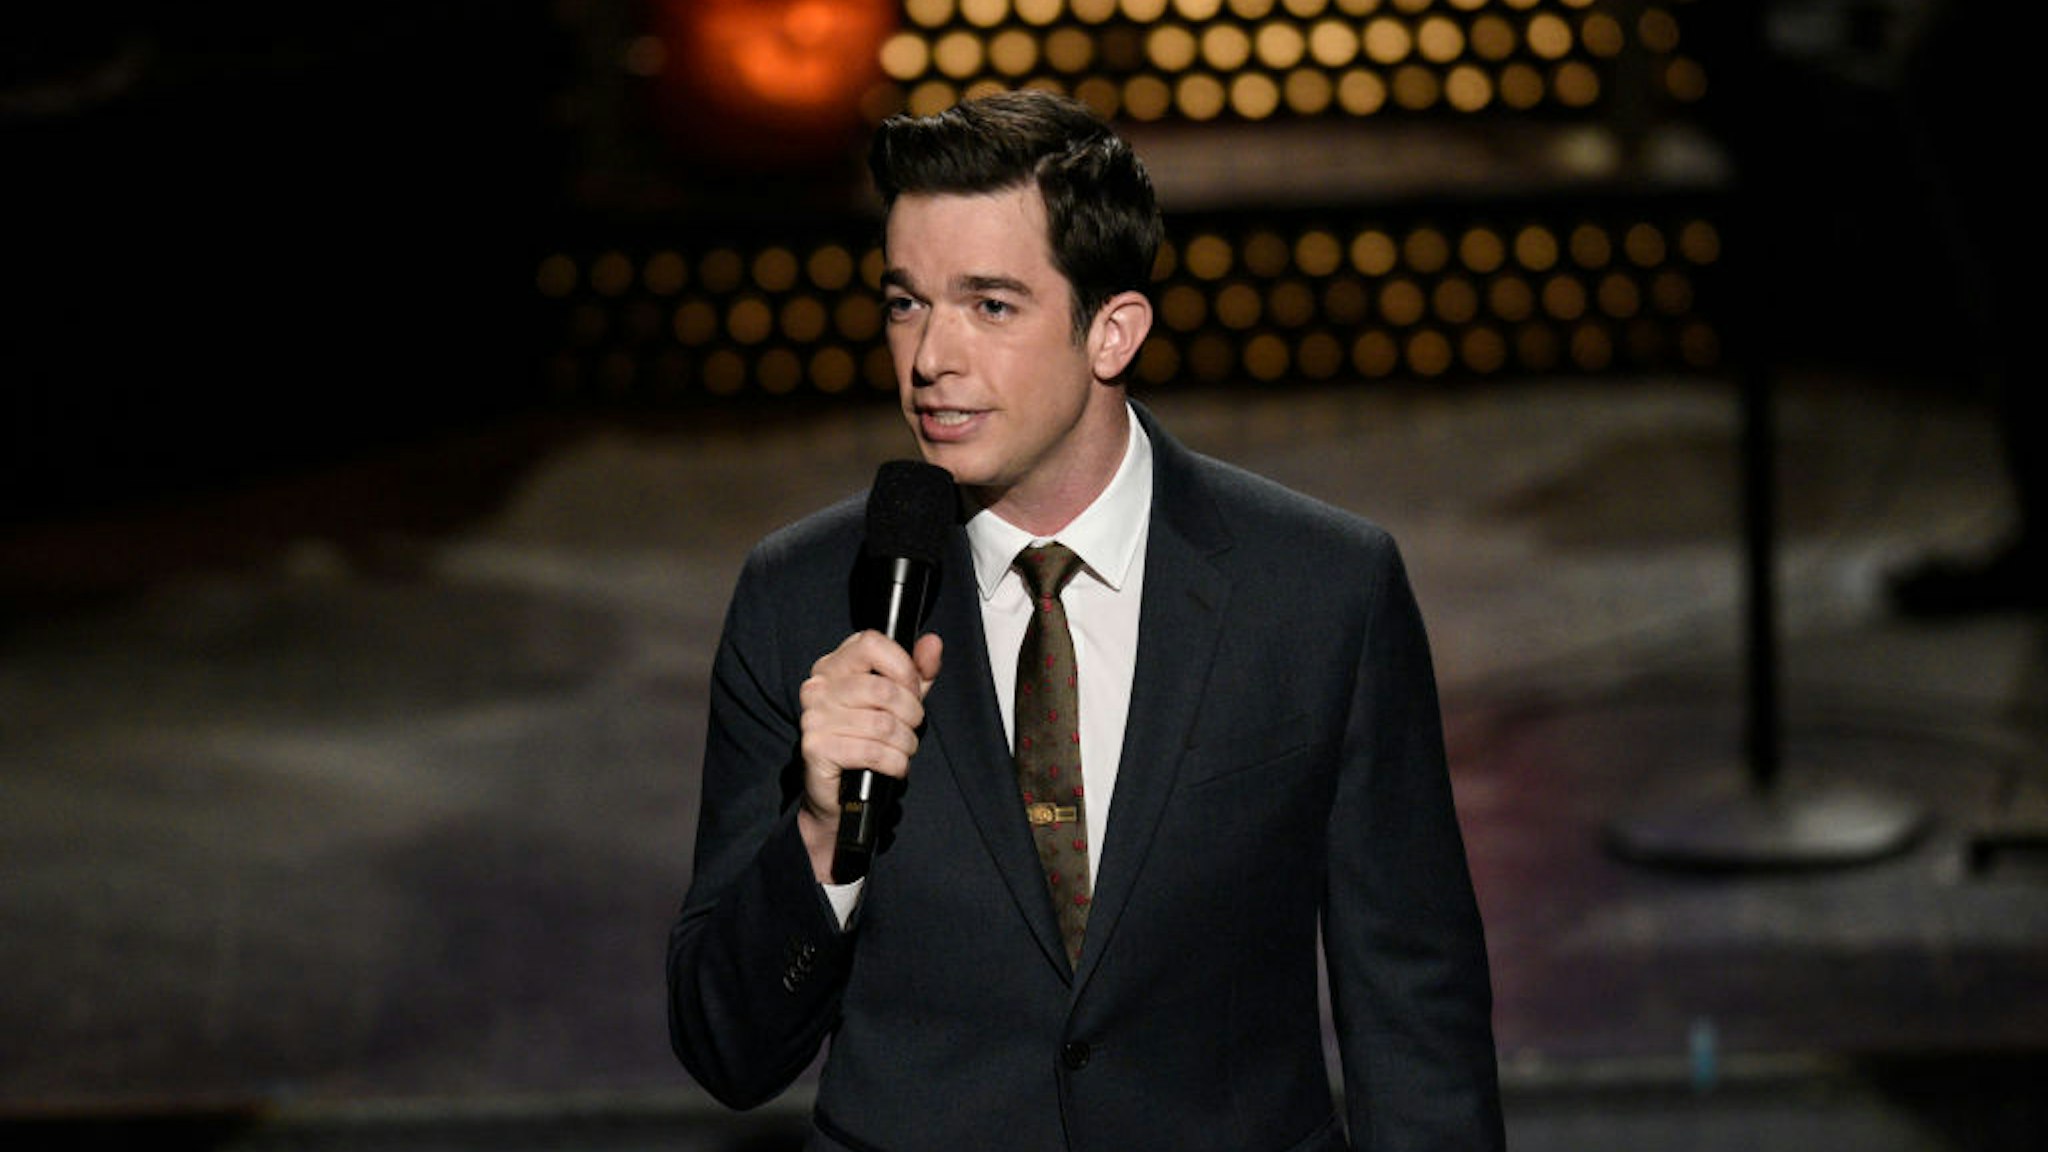 Pictured: Host John Mulaney during the Monologue on Saturday, October 31, 2020